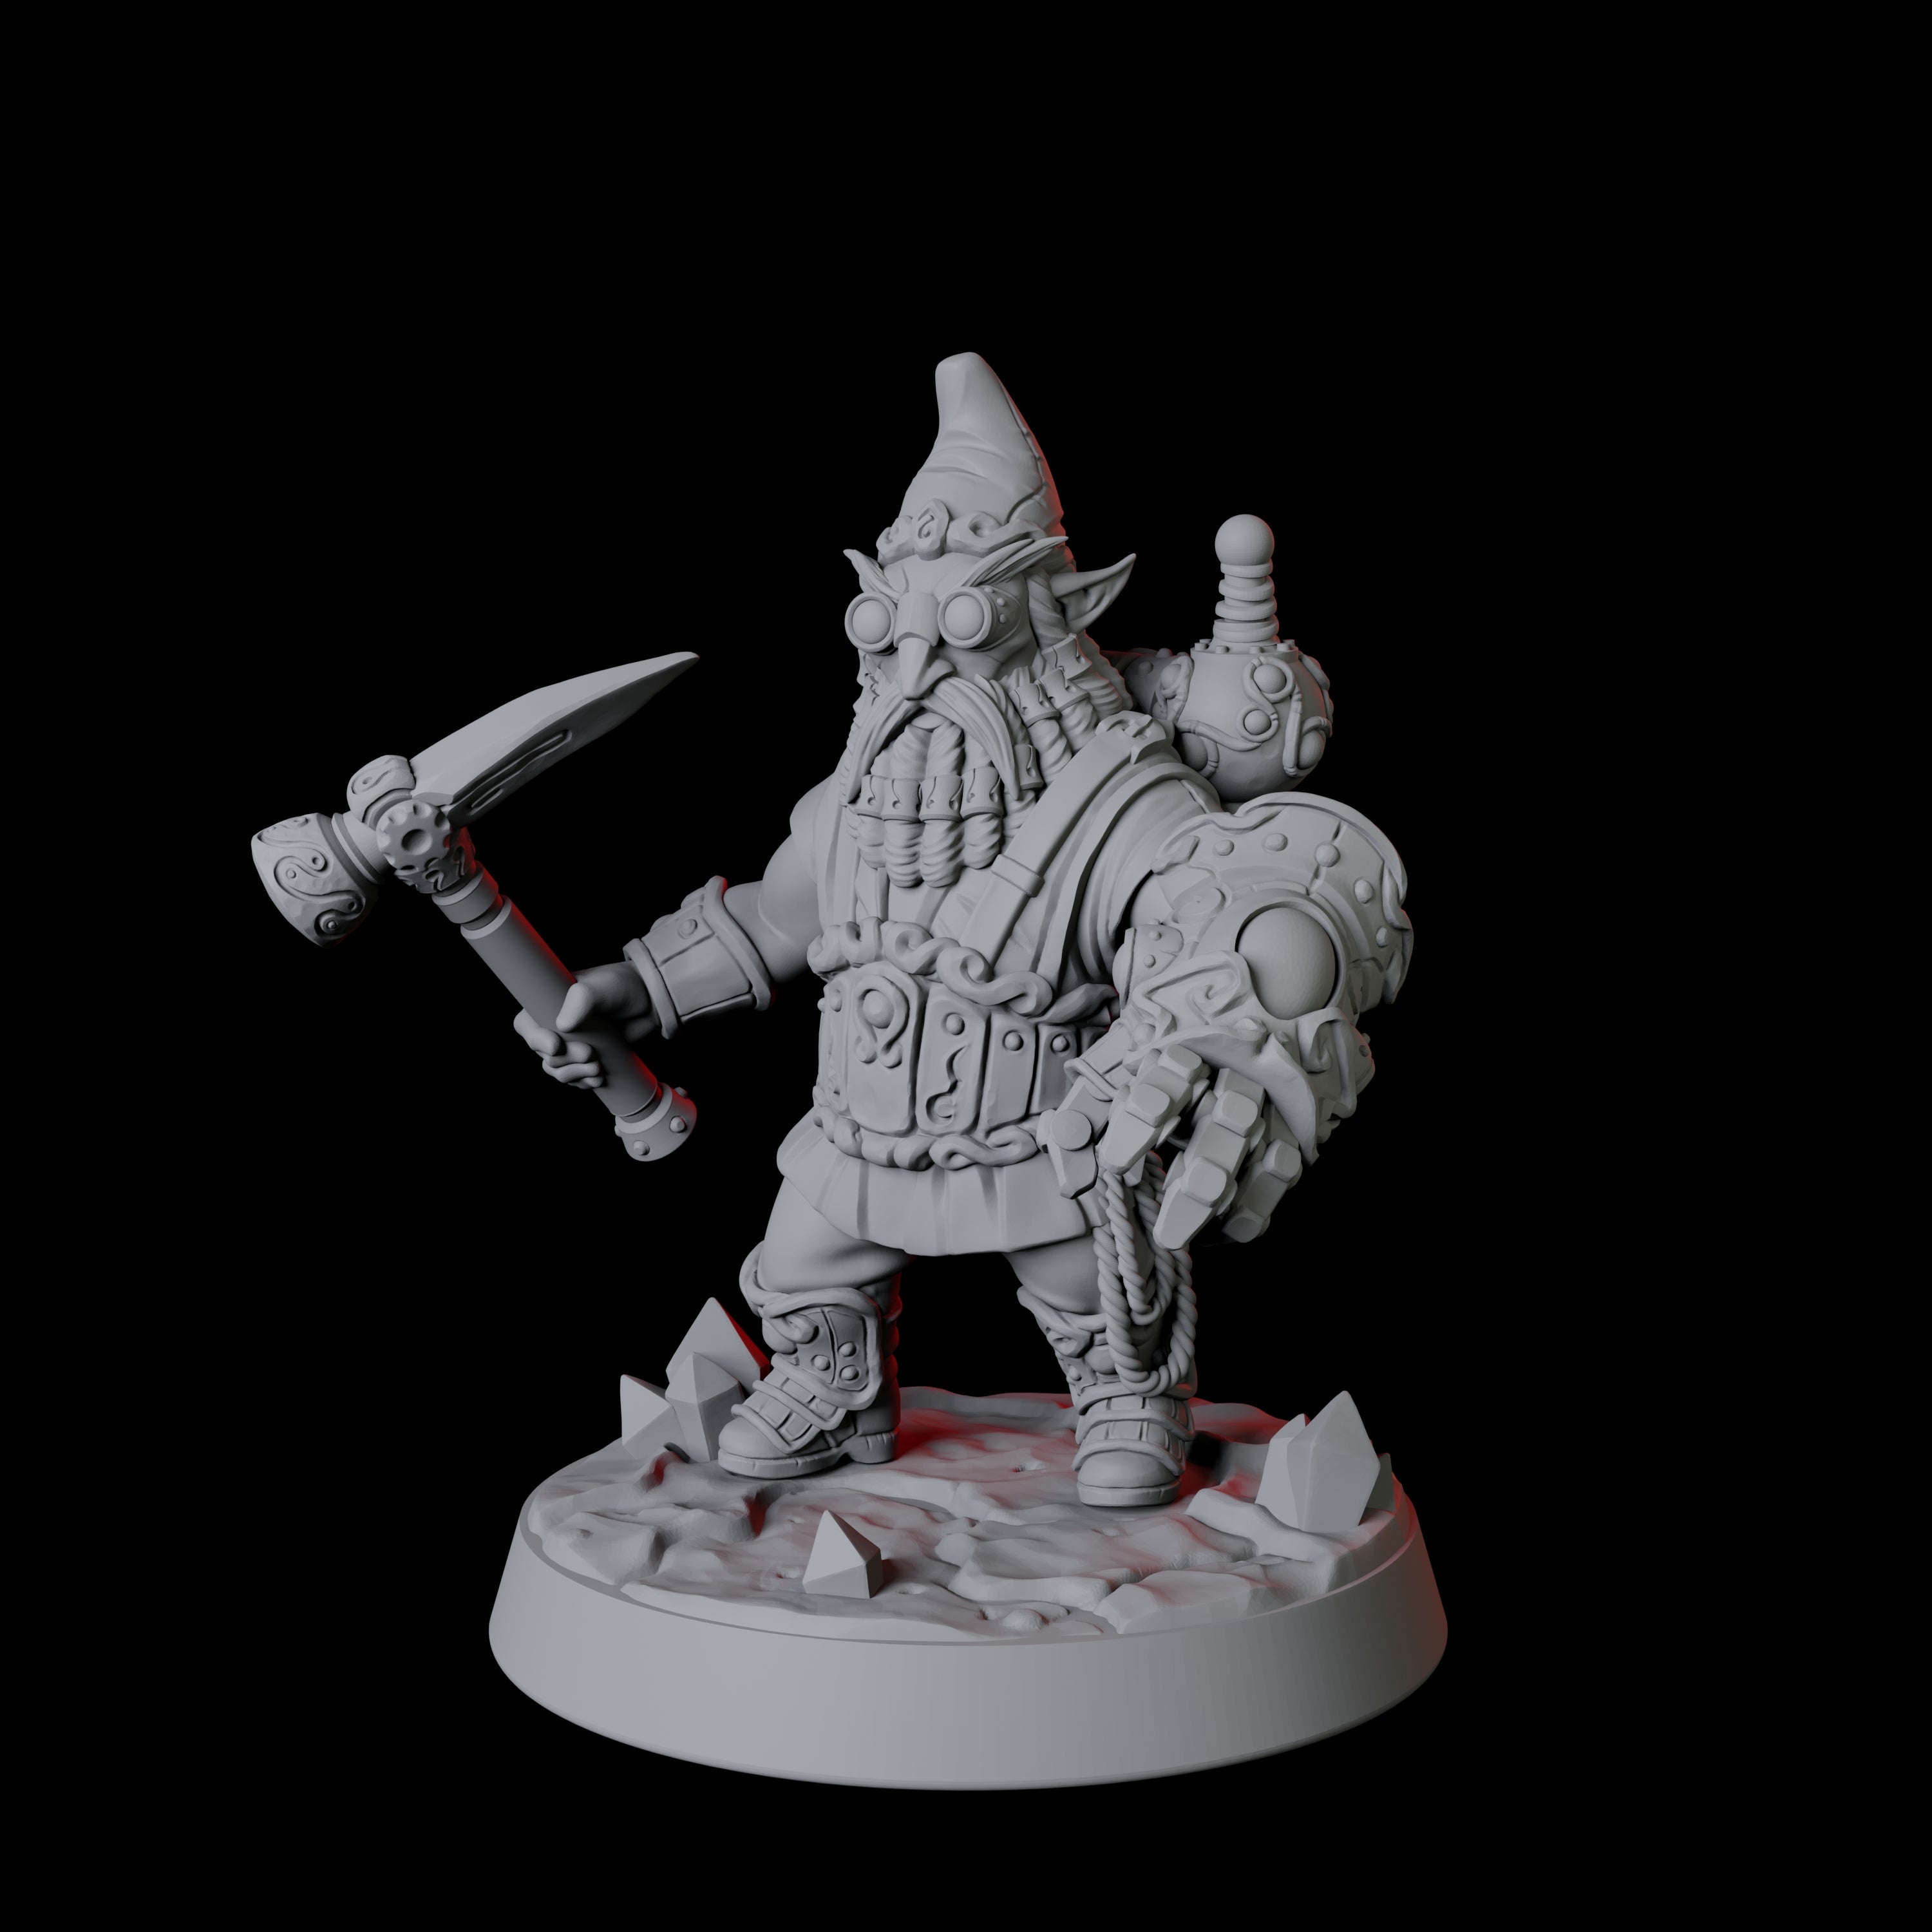 Deep Gnome Artificer A Miniature for Dungeons and Dragons, Pathfinder or other TTRPGs